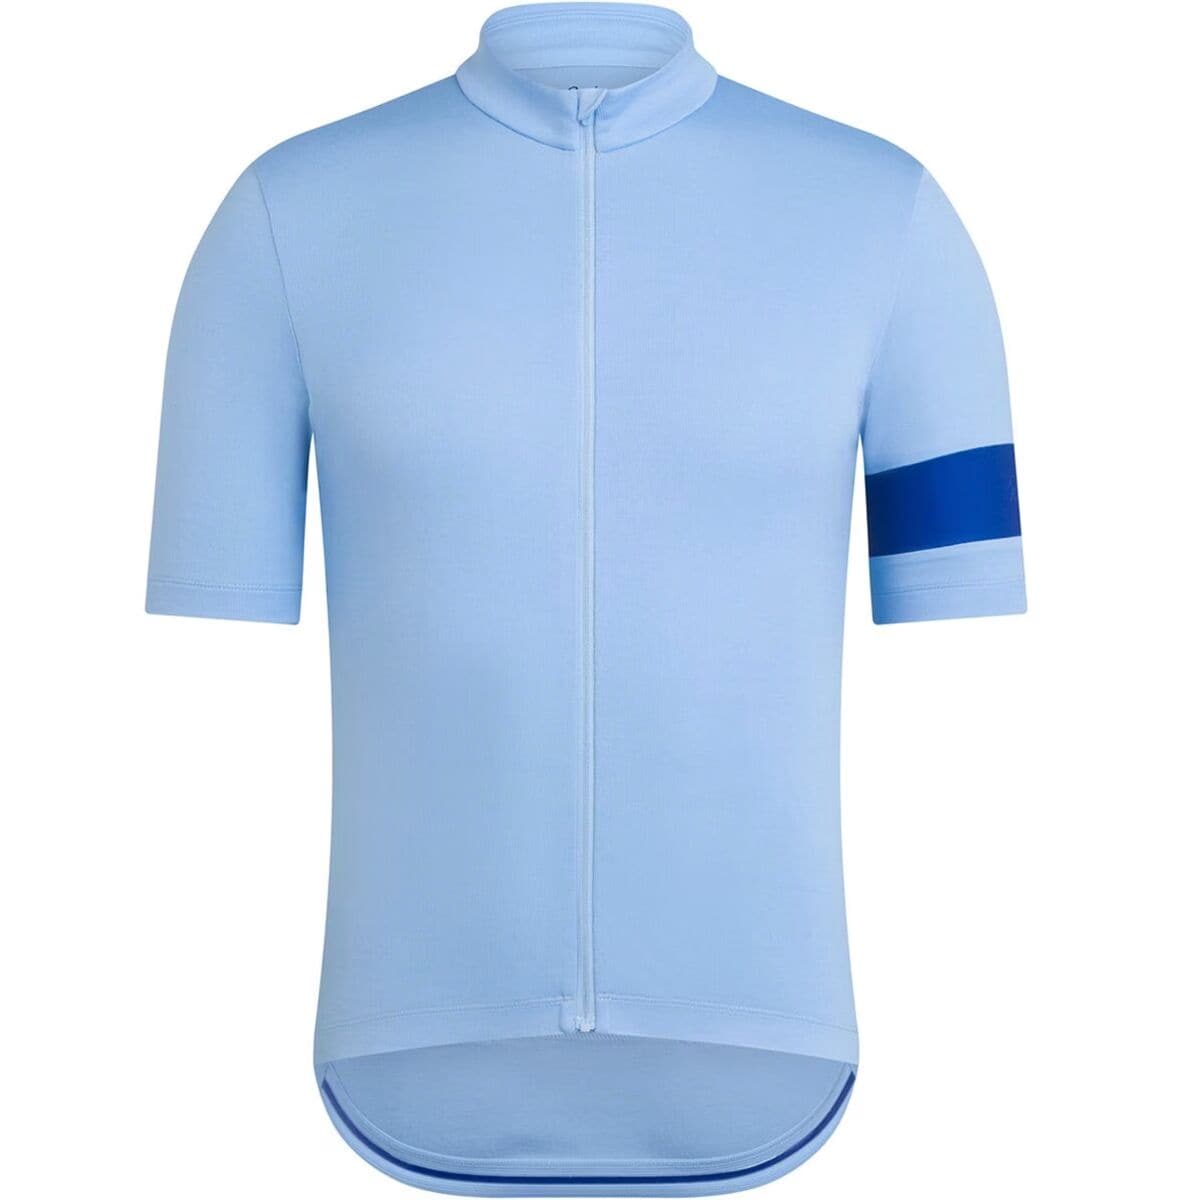 Men's Classic Jersey II, Men's Rapha Classic Jersey Made To Be Stylist And  Comfortable, Sustainable